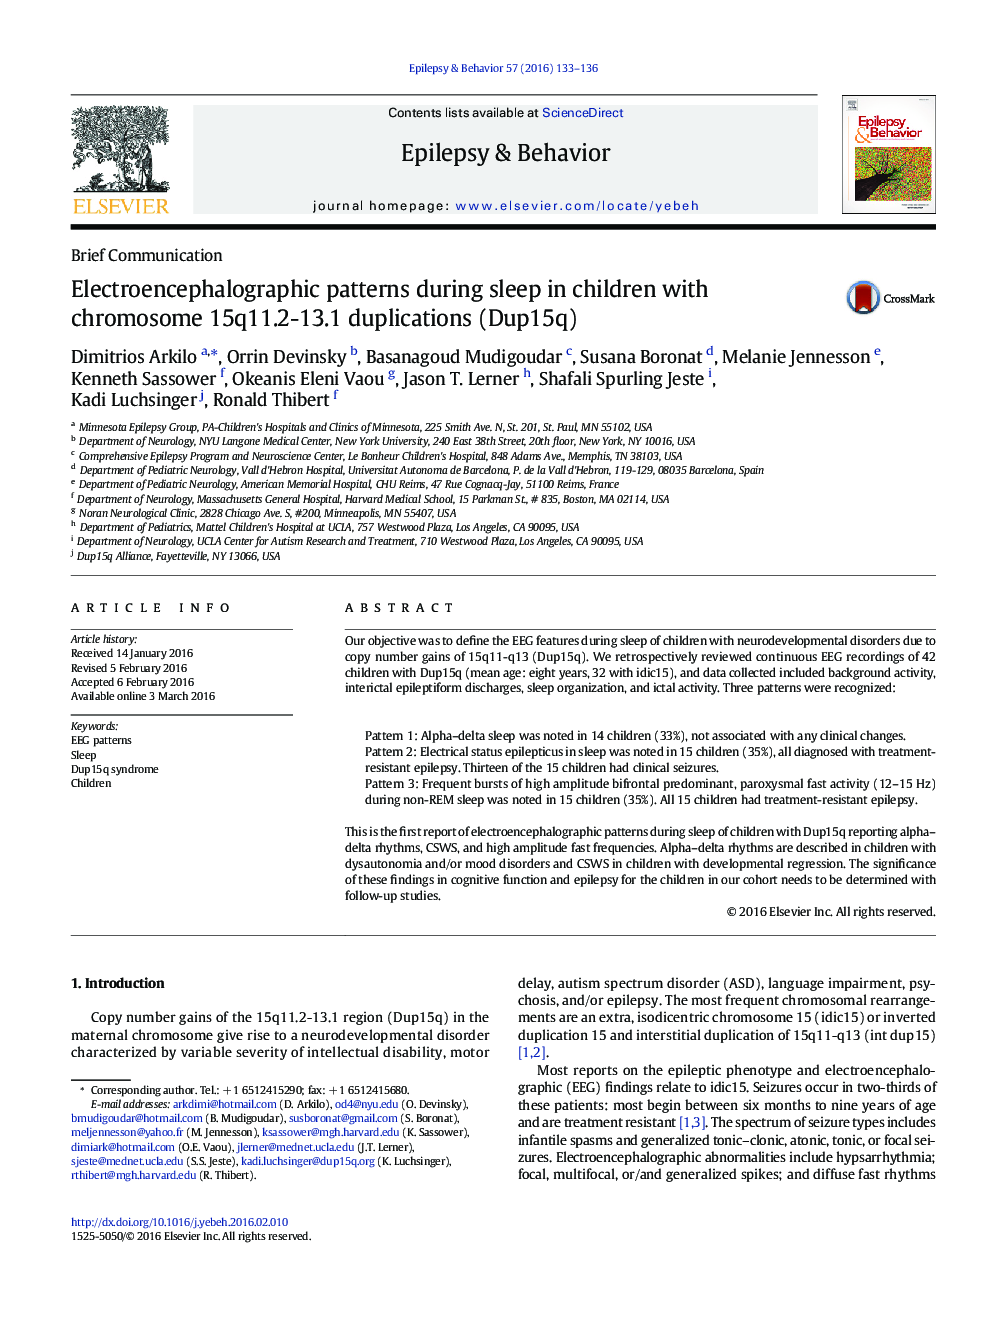 Brief CommunicationElectroencephalographic patterns during sleep in children with chromosome 15q11.2-13.1 duplications (Dup15q)